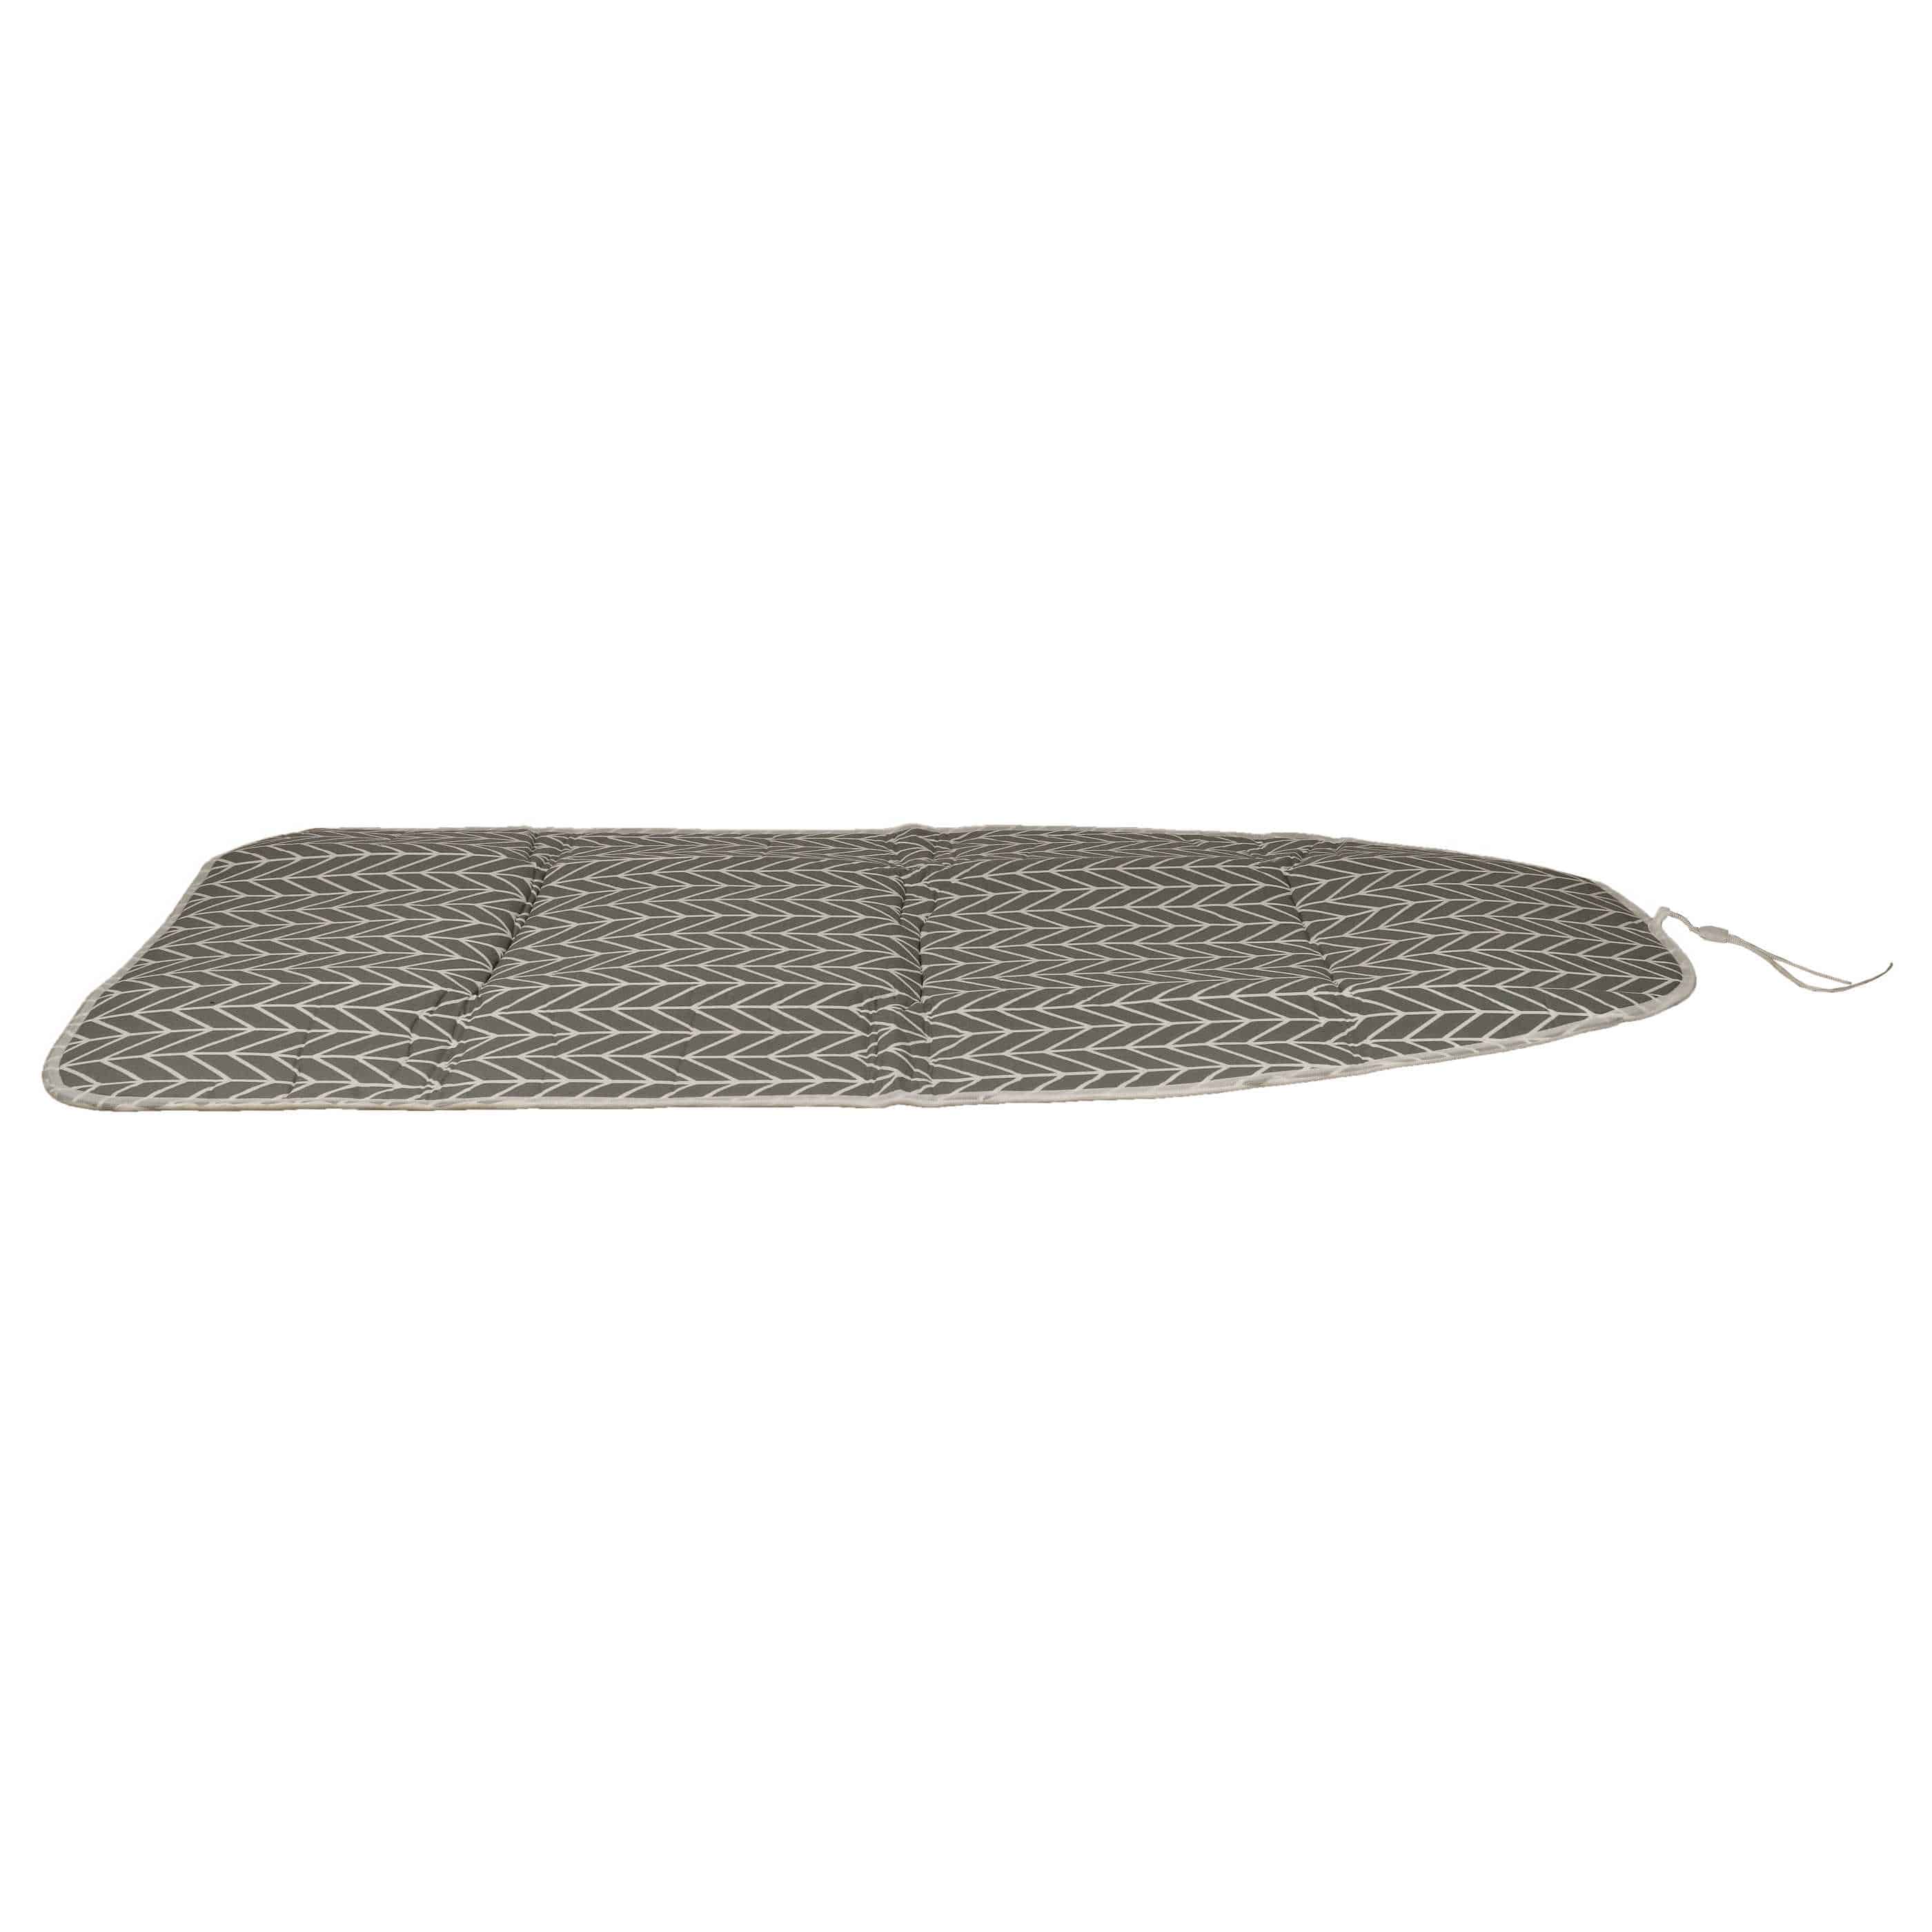 Ironing Board Cover replaces Laurastar myCover 131, 144.7842.898 for Bosch Ironing Board - Ironing Board Cover